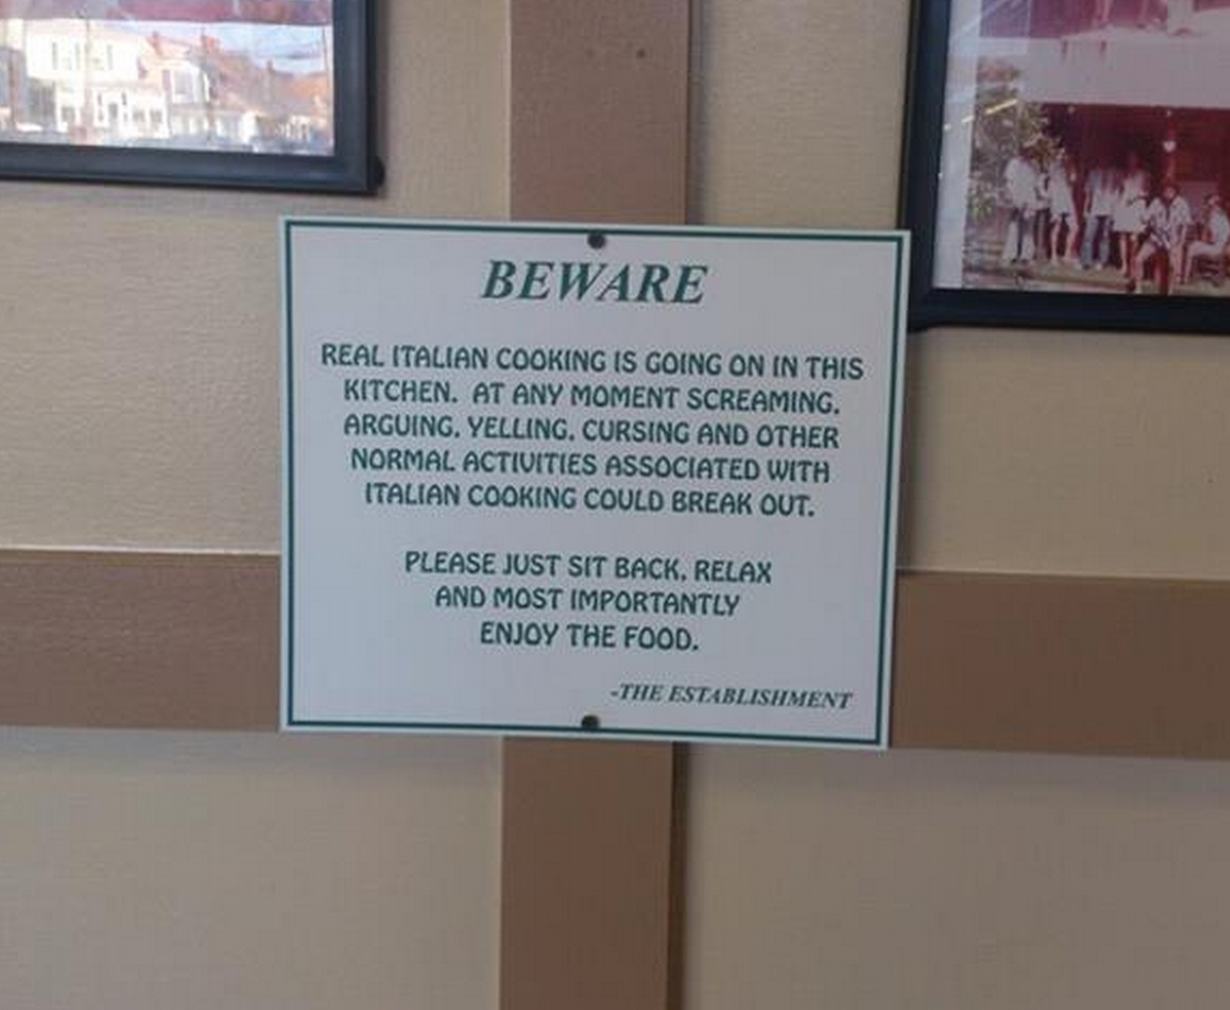 most ridiculous signs ever - Beware Real Italian Cooking Is Going On In This Kitchen. At Any Moment Screaming. Argoing. Yelling. Cursing And Other Normal Activities Associated With Italian Cooking Could Break Out. Please Just Sit Back, Relax And Most Impo